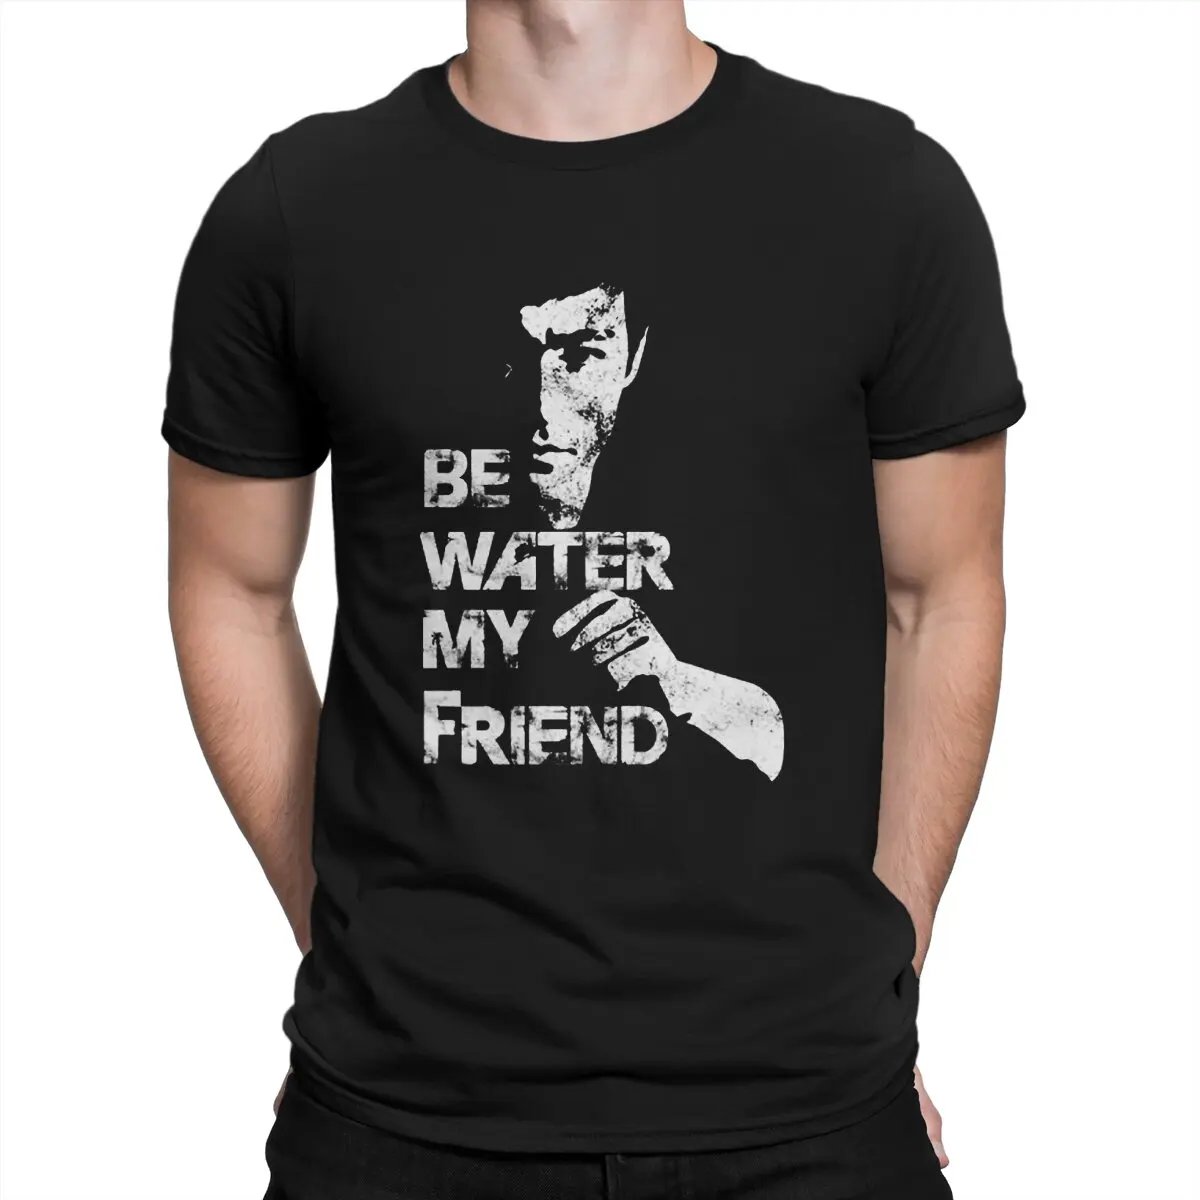 

Bruce Lee Chinese Kongfu Man Creative TShirt for Men Be Water My Friend Round Neck Basic T Shirt Personalize Birthday Gifts Tops